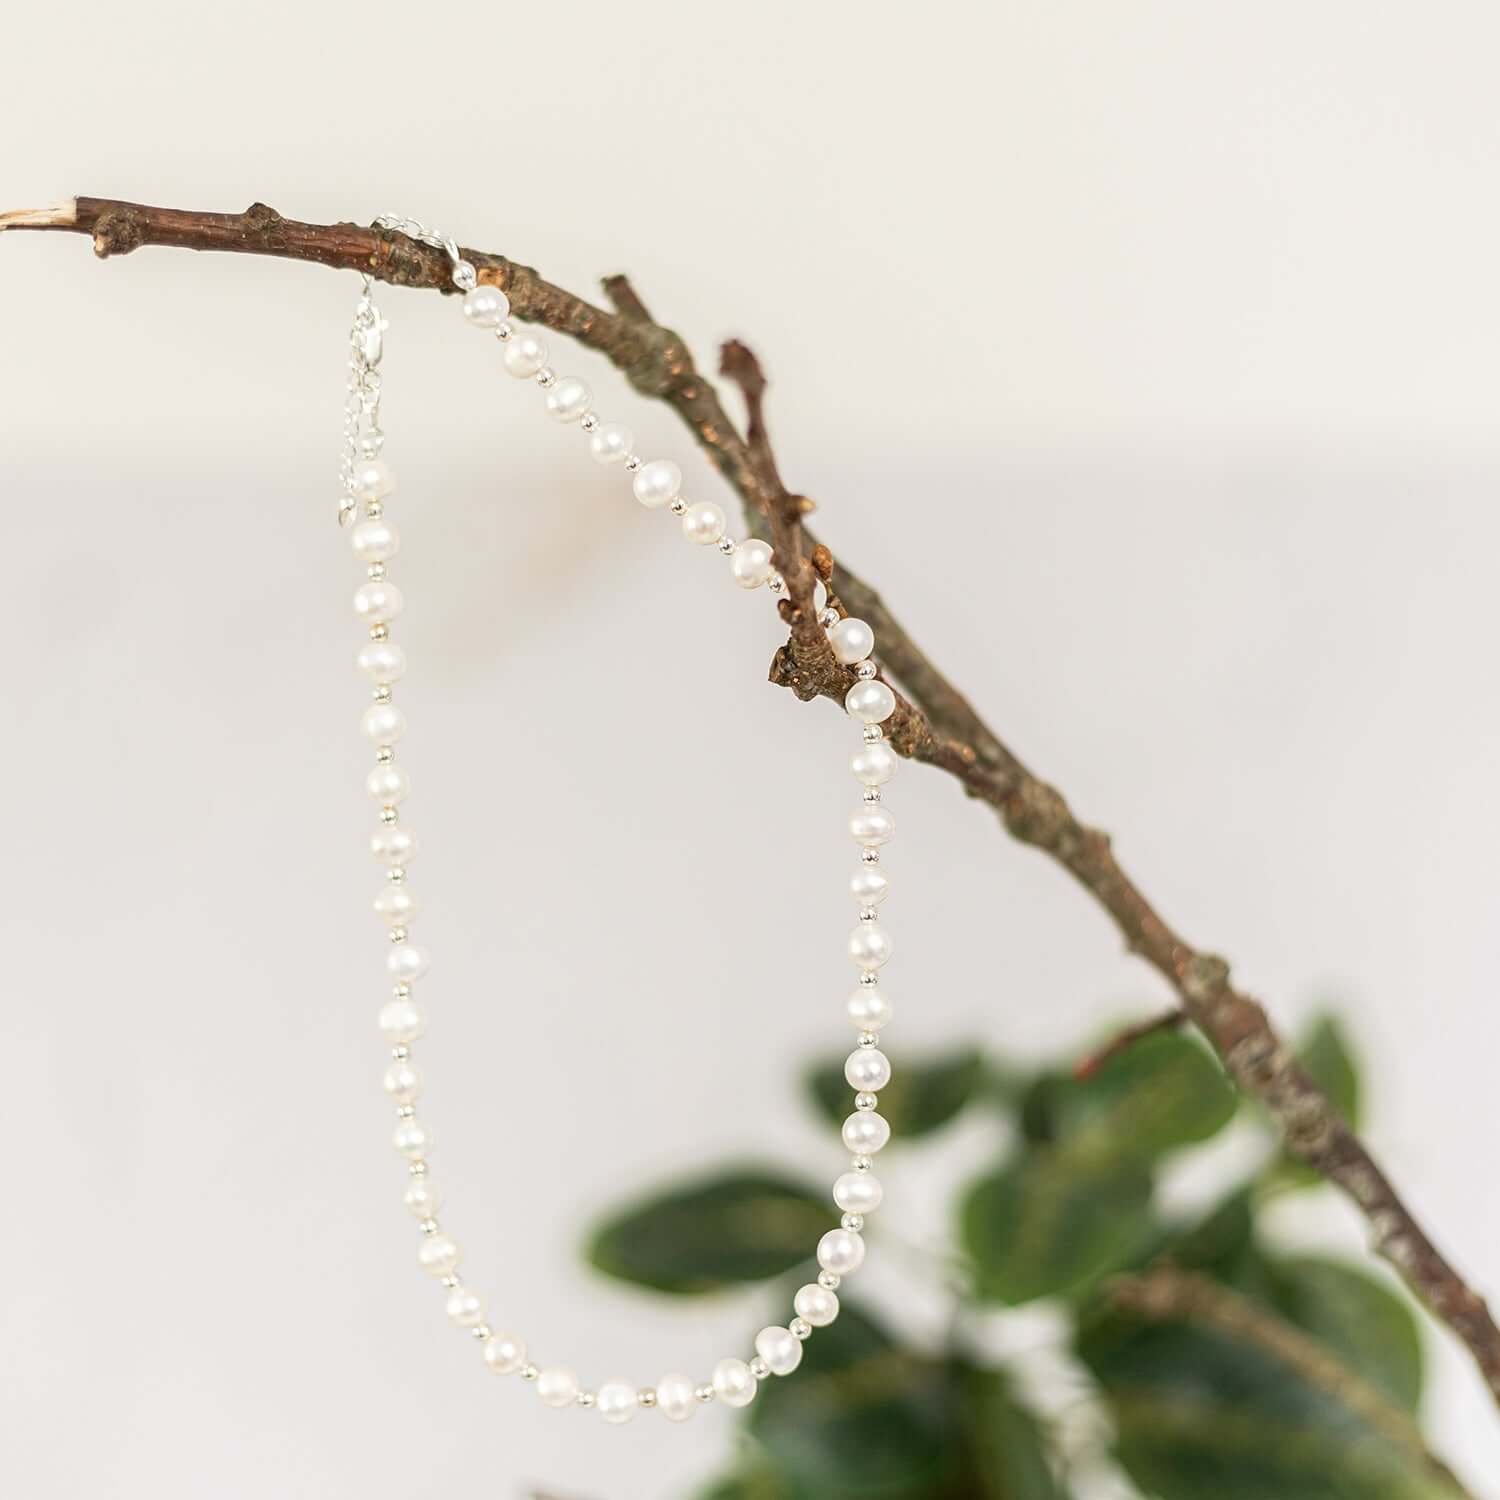  A pearl necklace with small, evenly spaced pearls is draped over a branch. The background is softly lit and slightly blurred, with hints of green leaves visible, giving the image a natural and aesthetic reminiscent of beaded necklaces UK collections.